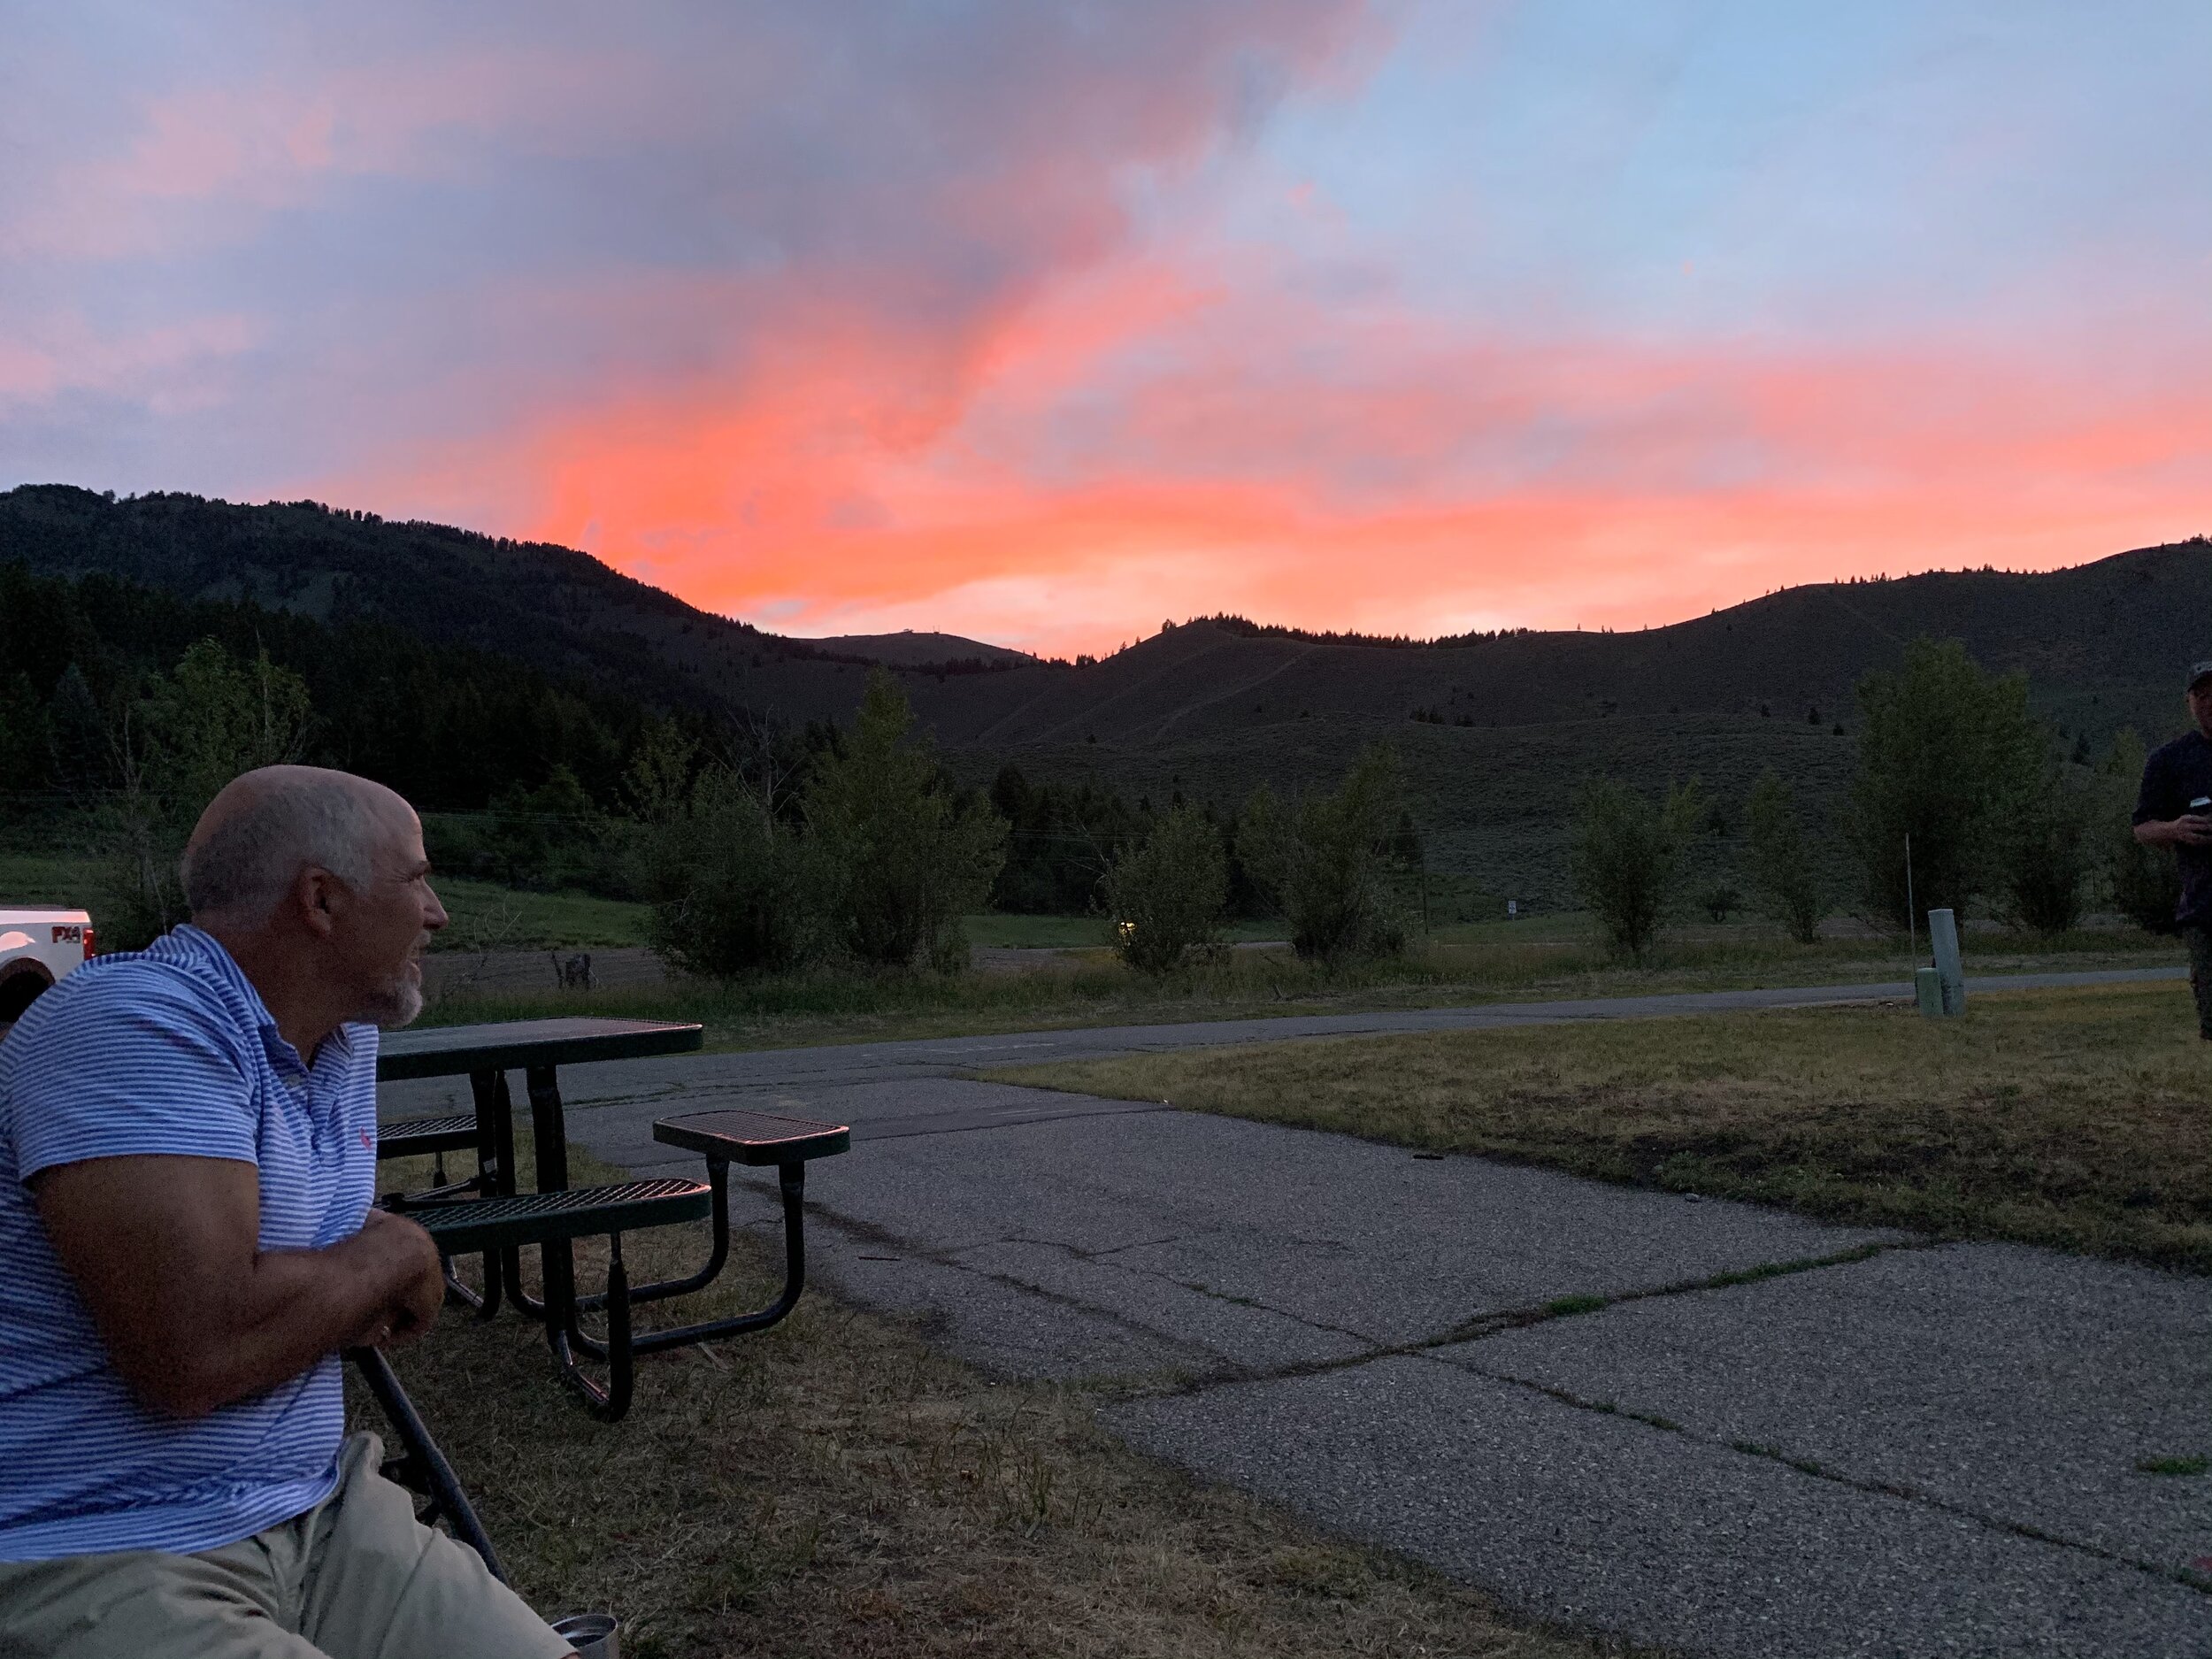  Ketchum, just outside of Sun Valley is a remote town with many of the same year-round outdoor treasures Sun Valley offers. The population is only about 2500 in this town of   beautiful sunsets and mountain ranches, and because of it’s seclusion and 